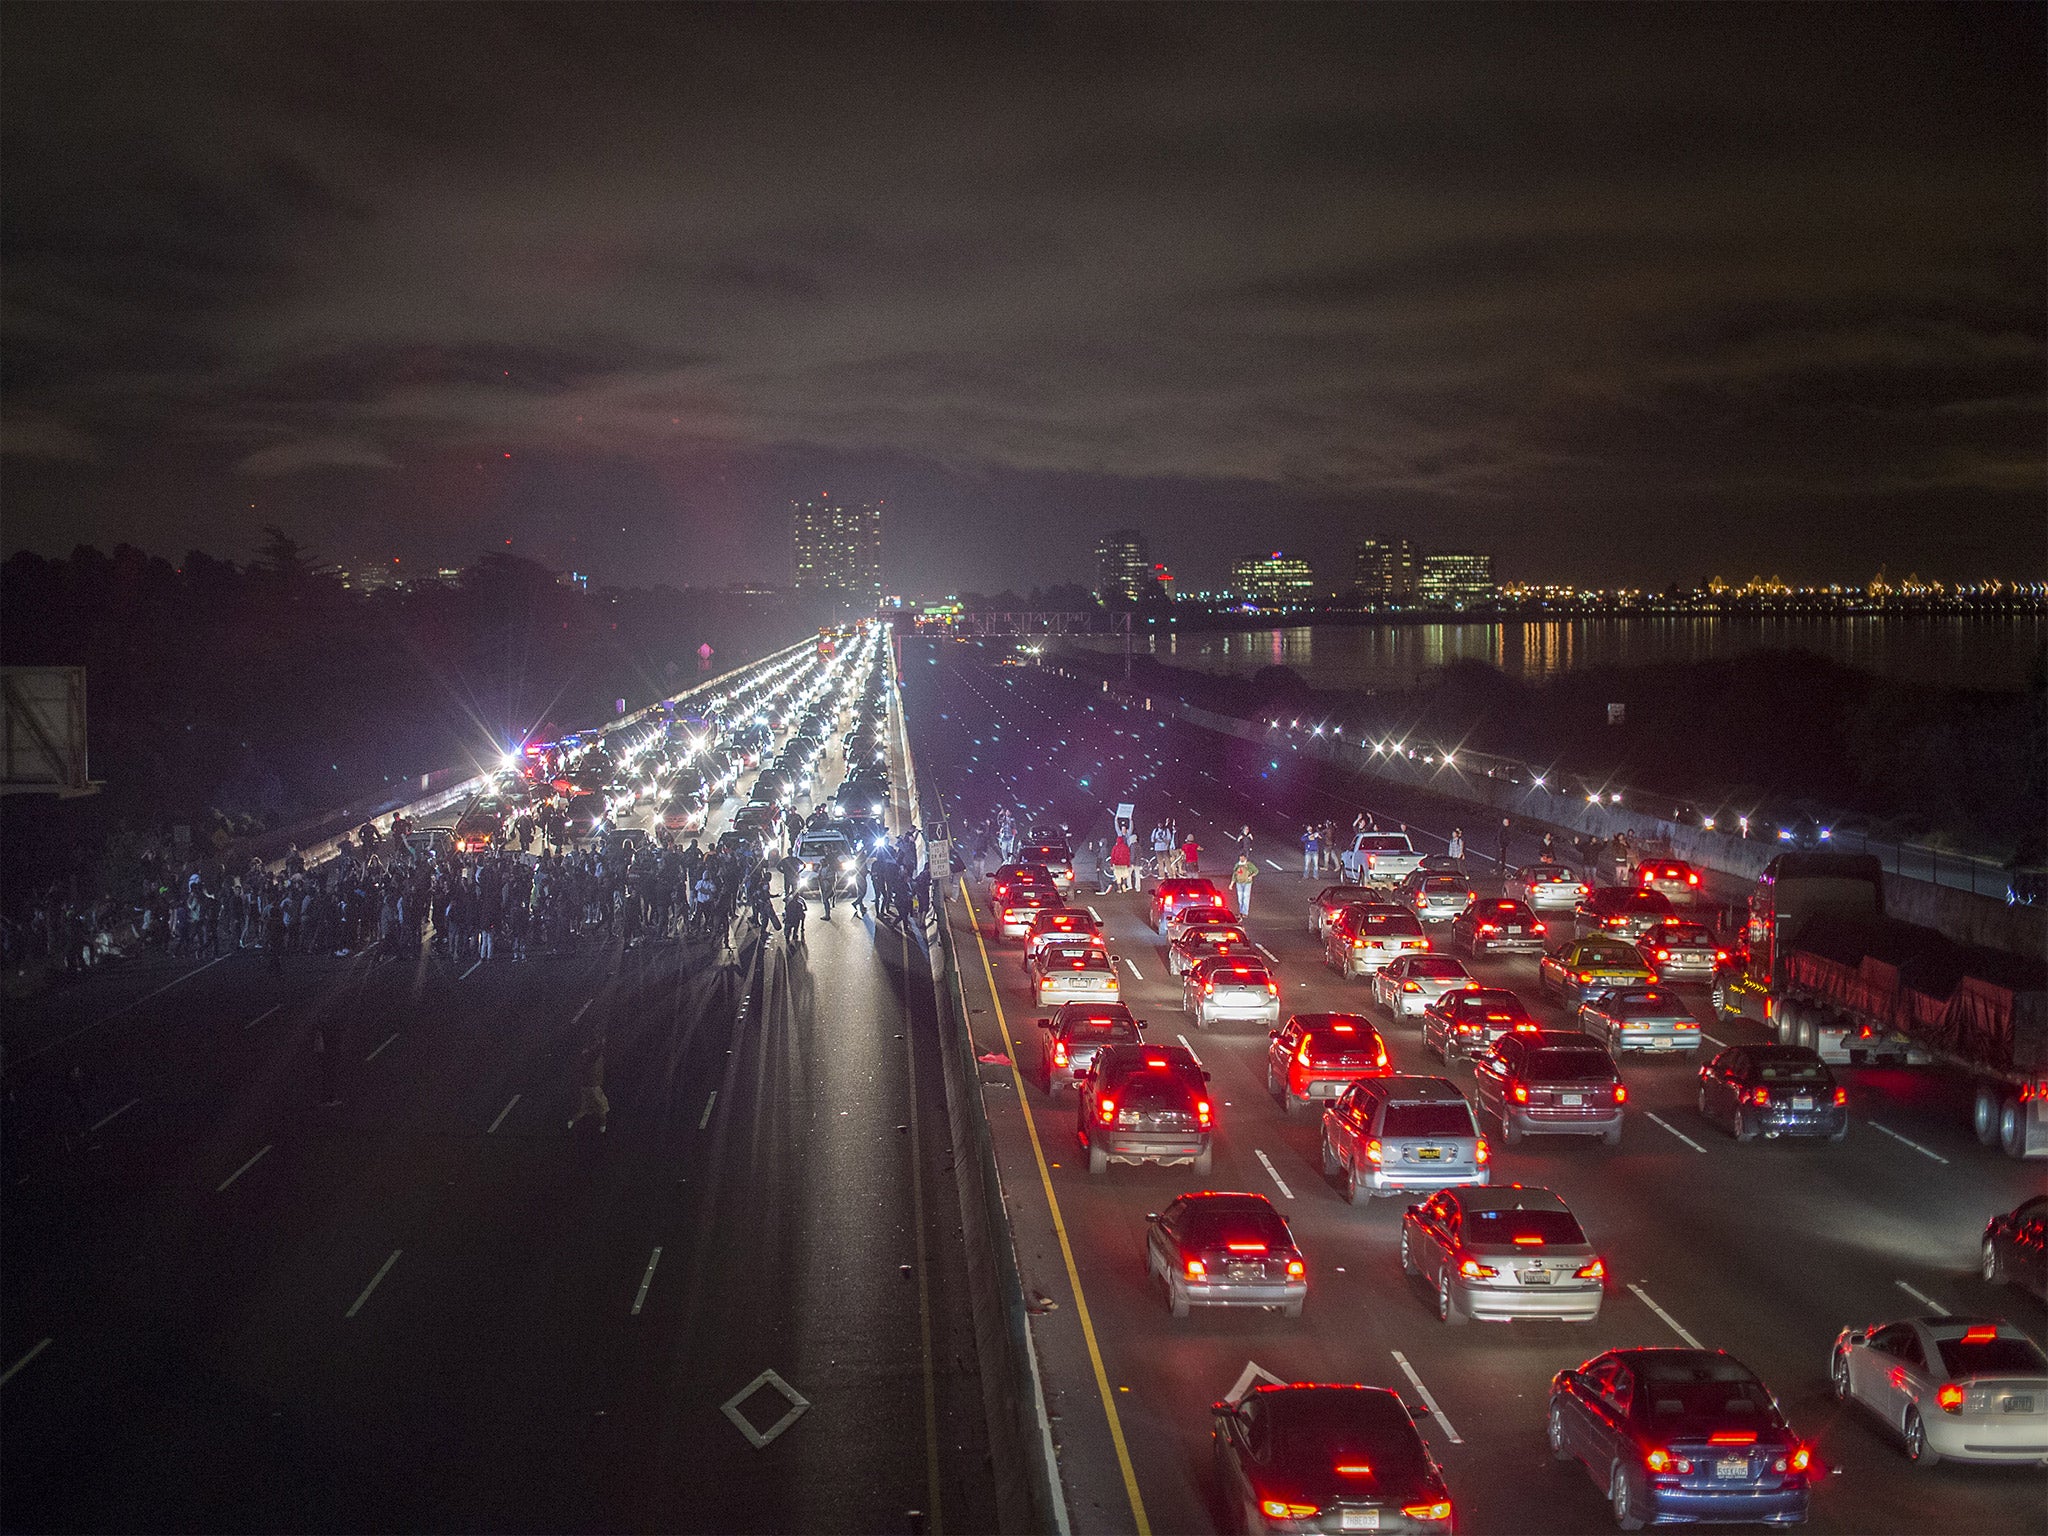 Protesters rallying against police violence block roads in California